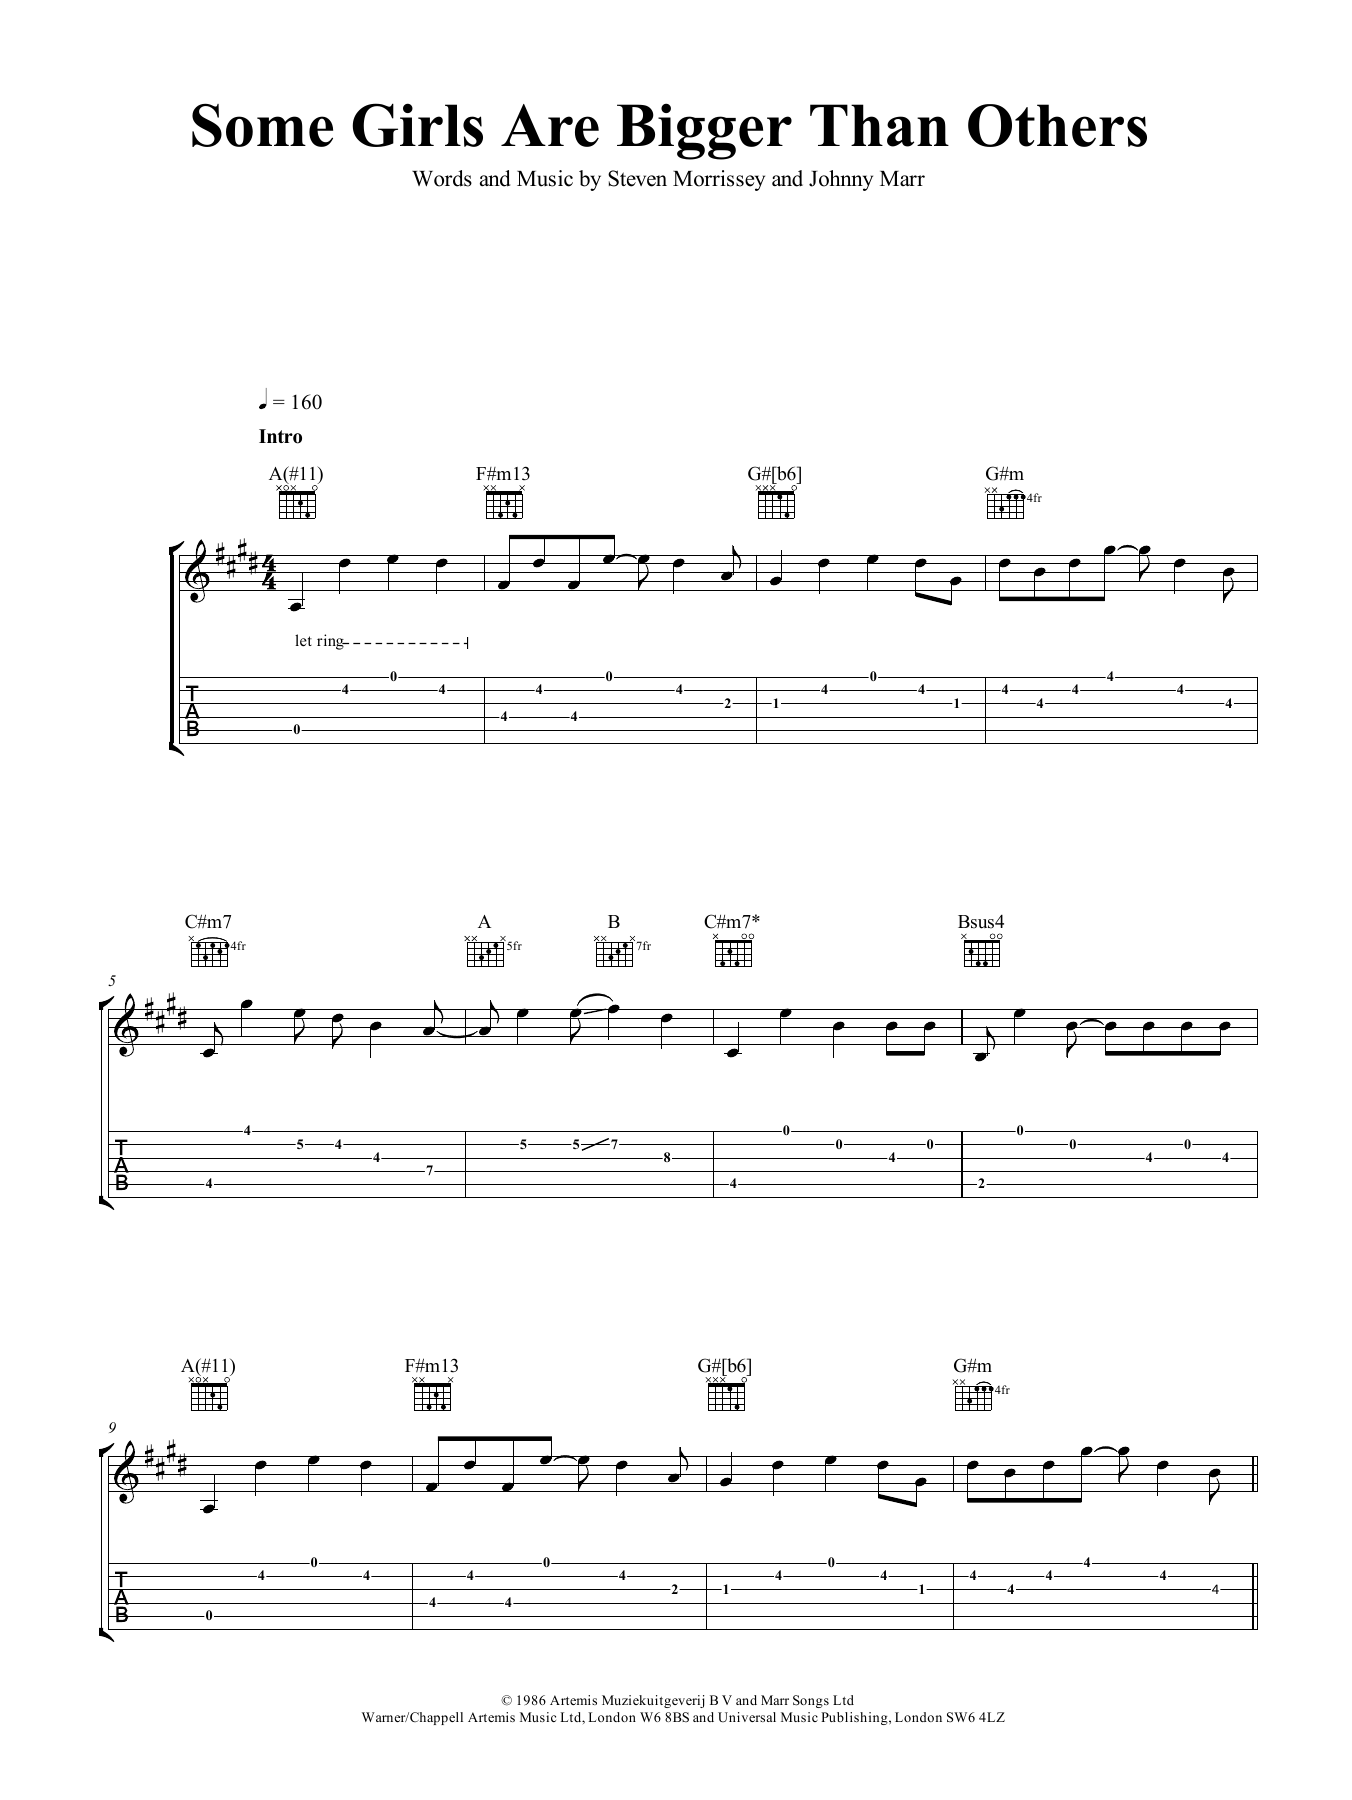 Download The Smiths Some Girls Are Bigger Than Others Sheet Music